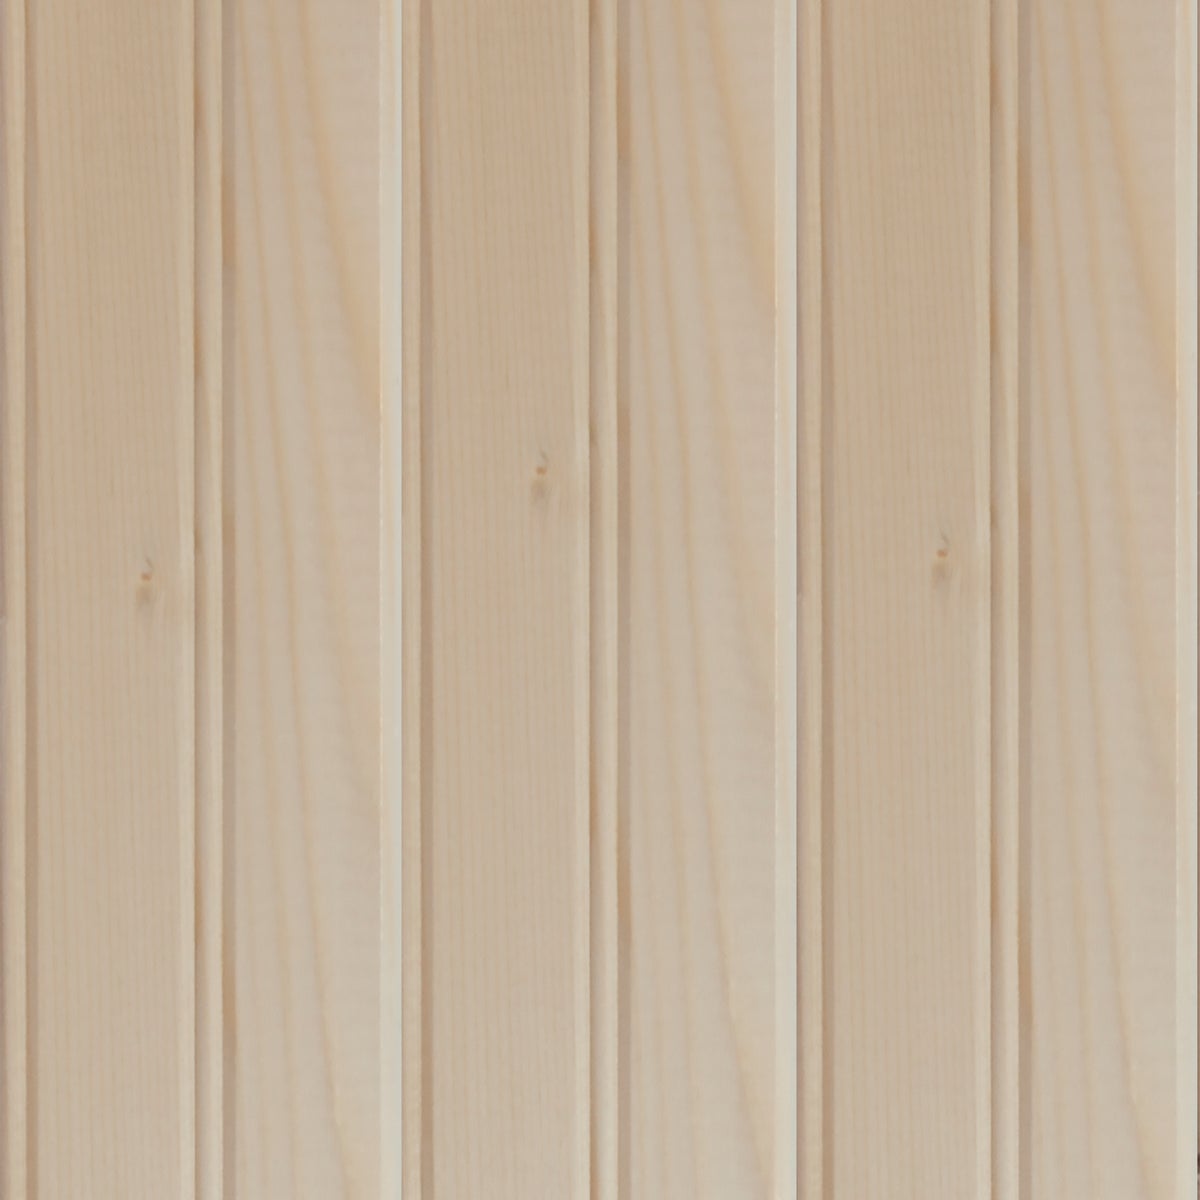 Item 160591, Reversible profile wall planks. Features two profile choices in one plank.